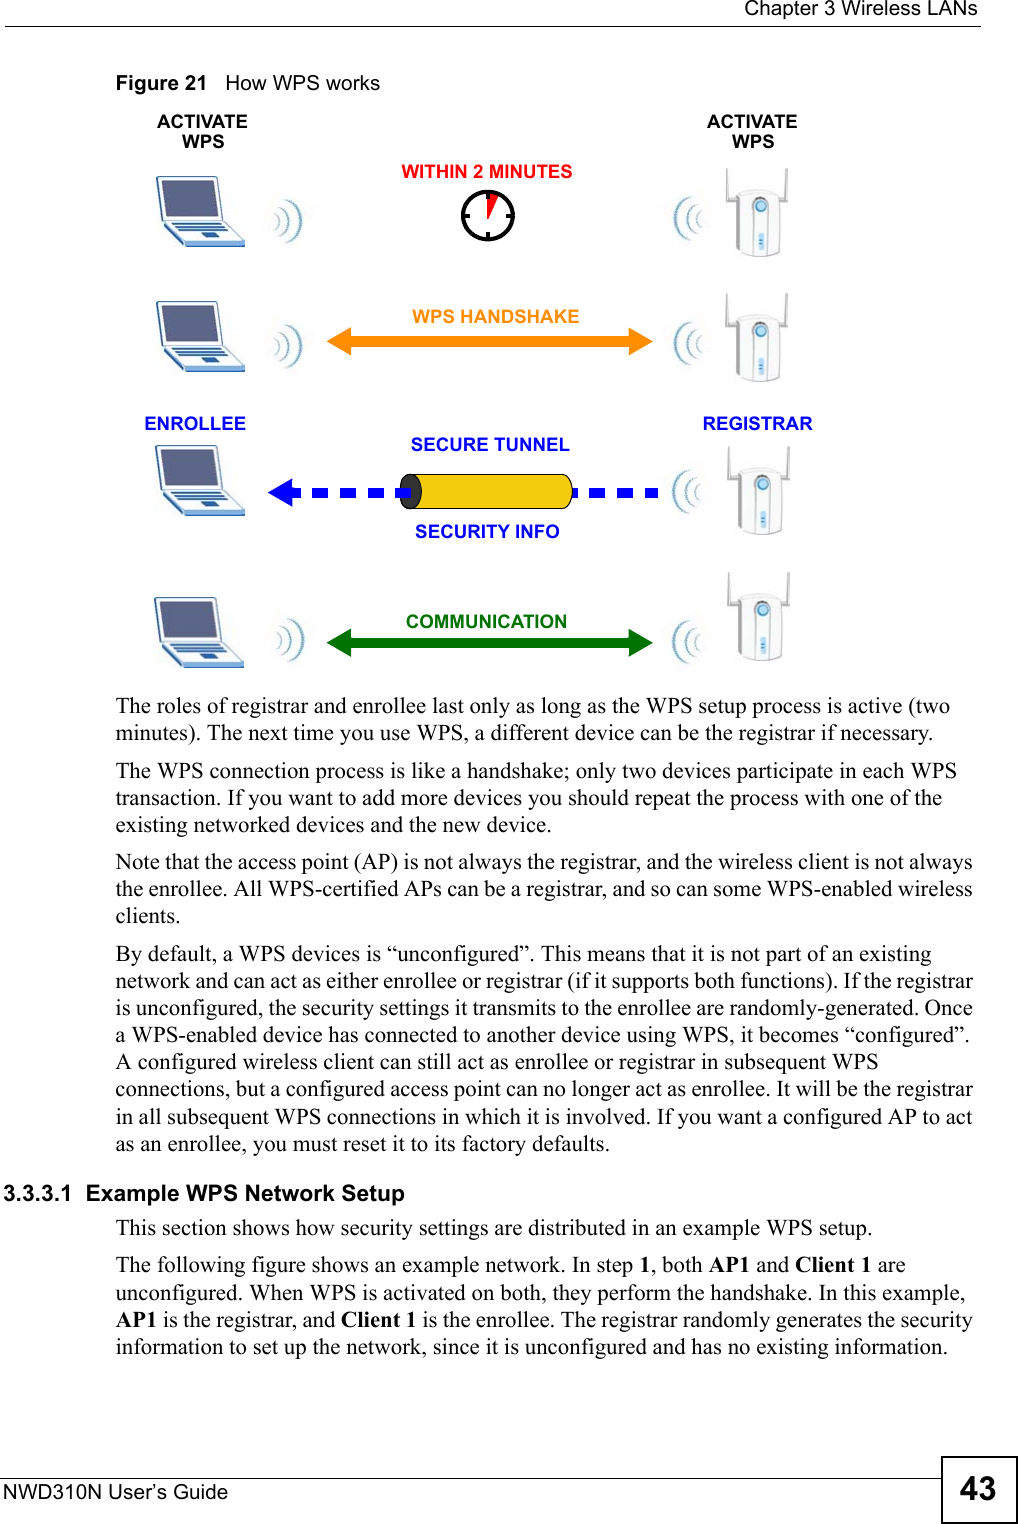  Chapter 3 Wireless LANsNWD310N User’s Guide 43Figure 21   How WPS worksThe roles of registrar and enrollee last only as long as the WPS setup process is active (two minutes). The next time you use WPS, a different device can be the registrar if necessary.The WPS connection process is like a handshake; only two devices participate in each WPS transaction. If you want to add more devices you should repeat the process with one of the existing networked devices and the new device.Note that the access point (AP) is not always the registrar, and the wireless client is not always the enrollee. All WPS-certified APs can be a registrar, and so can some WPS-enabled wireless clients.By default, a WPS devices is “unconfigured”. This means that it is not part of an existing network and can act as either enrollee or registrar (if it supports both functions). If the registrar is unconfigured, the security settings it transmits to the enrollee are randomly-generated. Once a WPS-enabled device has connected to another device using WPS, it becomes “configured”. A configured wireless client can still act as enrollee or registrar in subsequent WPS connections, but a configured access point can no longer act as enrollee. It will be the registrar in all subsequent WPS connections in which it is involved. If you want a configured AP to act as an enrollee, you must reset it to its factory defaults.3.3.3.1  Example WPS Network SetupThis section shows how security settings are distributed in an example WPS setup.The following figure shows an example network. In step 1, both AP1 and Client 1 are unconfigured. When WPS is activated on both, they perform the handshake. In this example, AP1 is the registrar, and Client 1 is the enrollee. The registrar randomly generates the security information to set up the network, since it is unconfigured and has no existing information.SECURE TUNNELSECURITY INFOWITHIN 2 MINUTESCOMMUNICATIONACTIVATEWPSACTIVATEWPSWPS HANDSHAKEREGISTRARENROLLEE